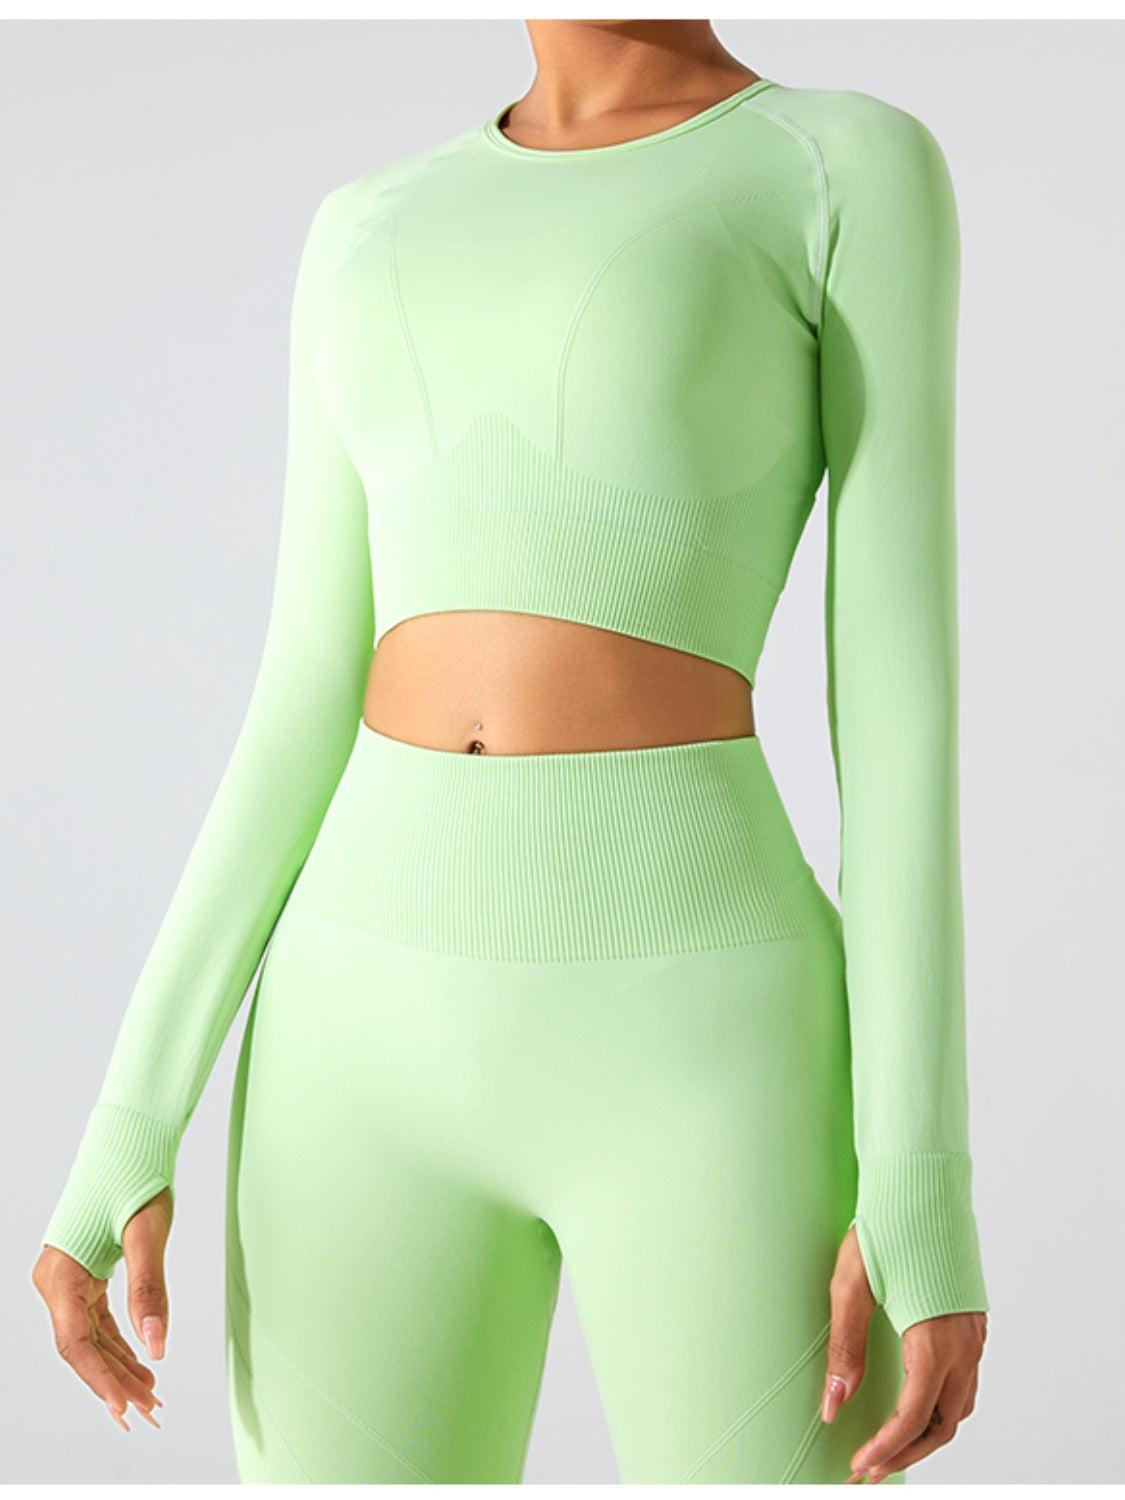 a woman in a green crop top and leggings